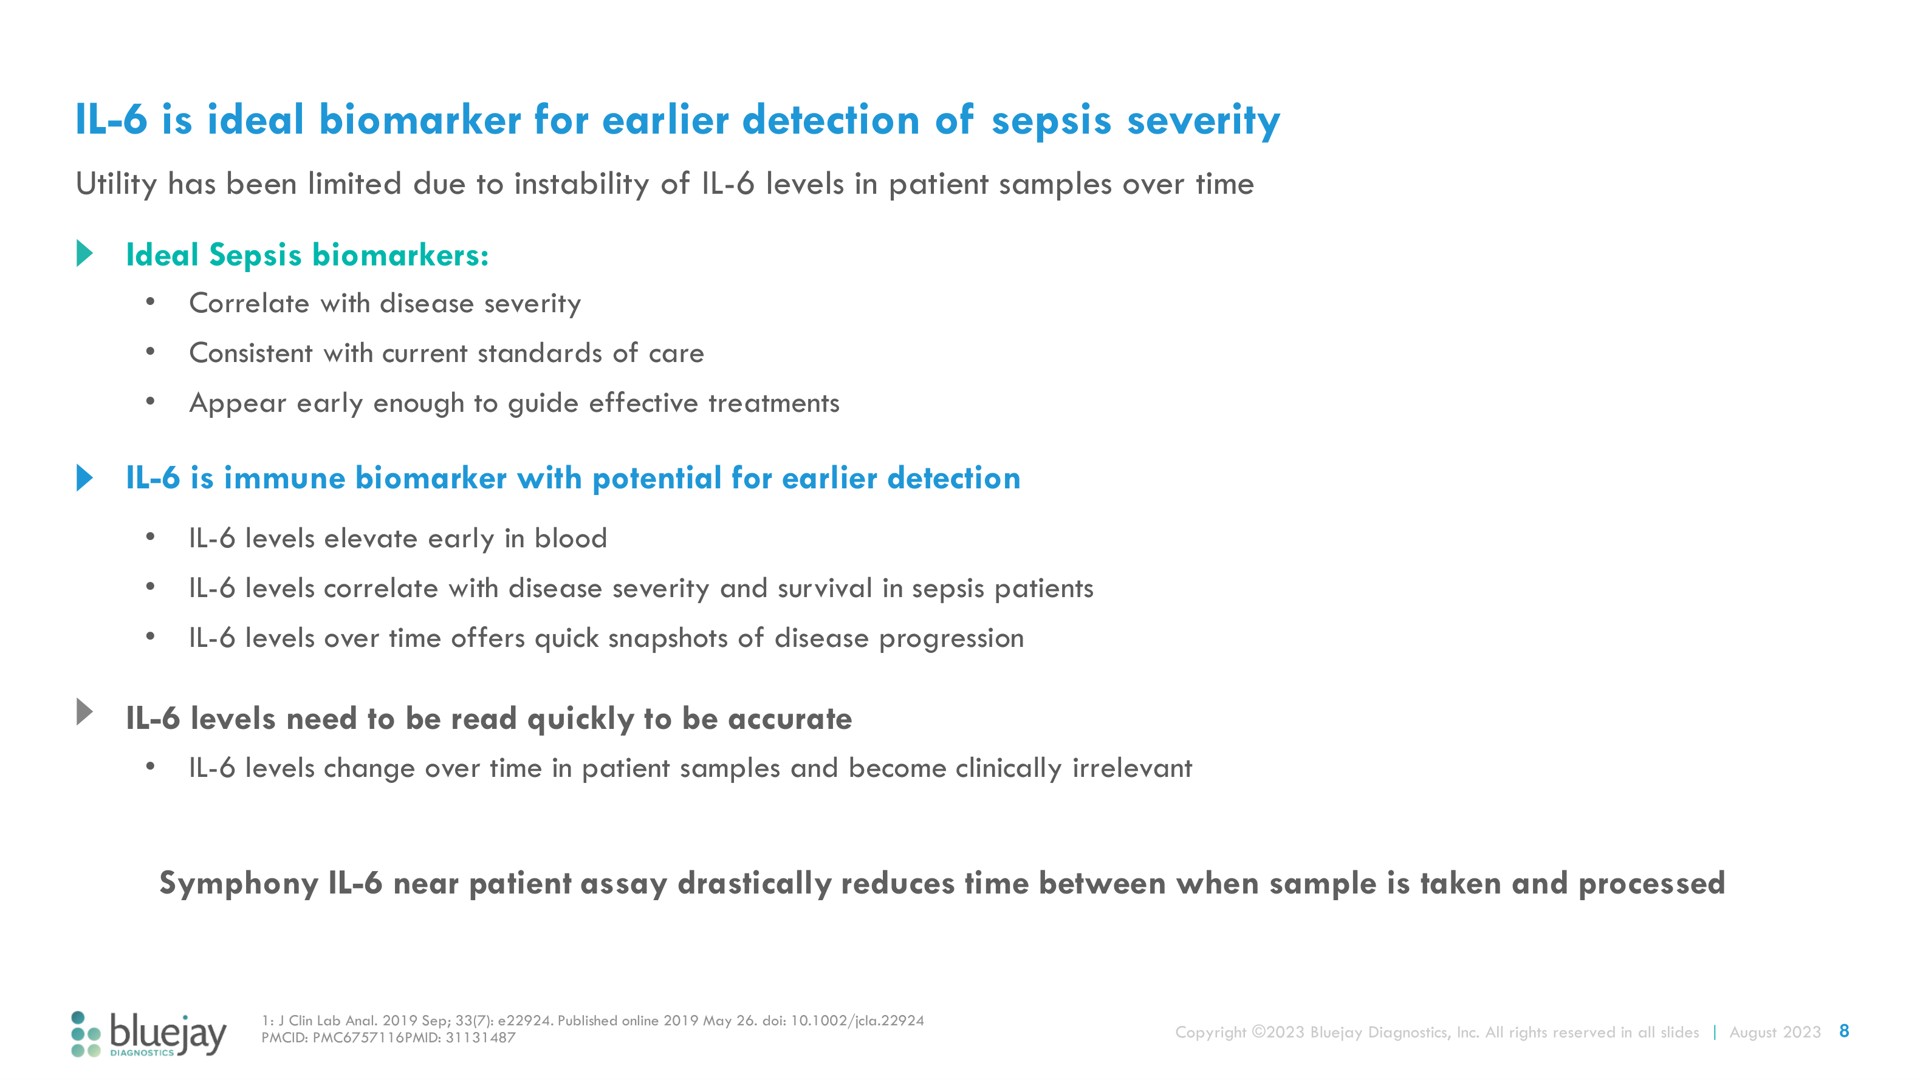 is ideal for detection of sepsis severity | Bluejay